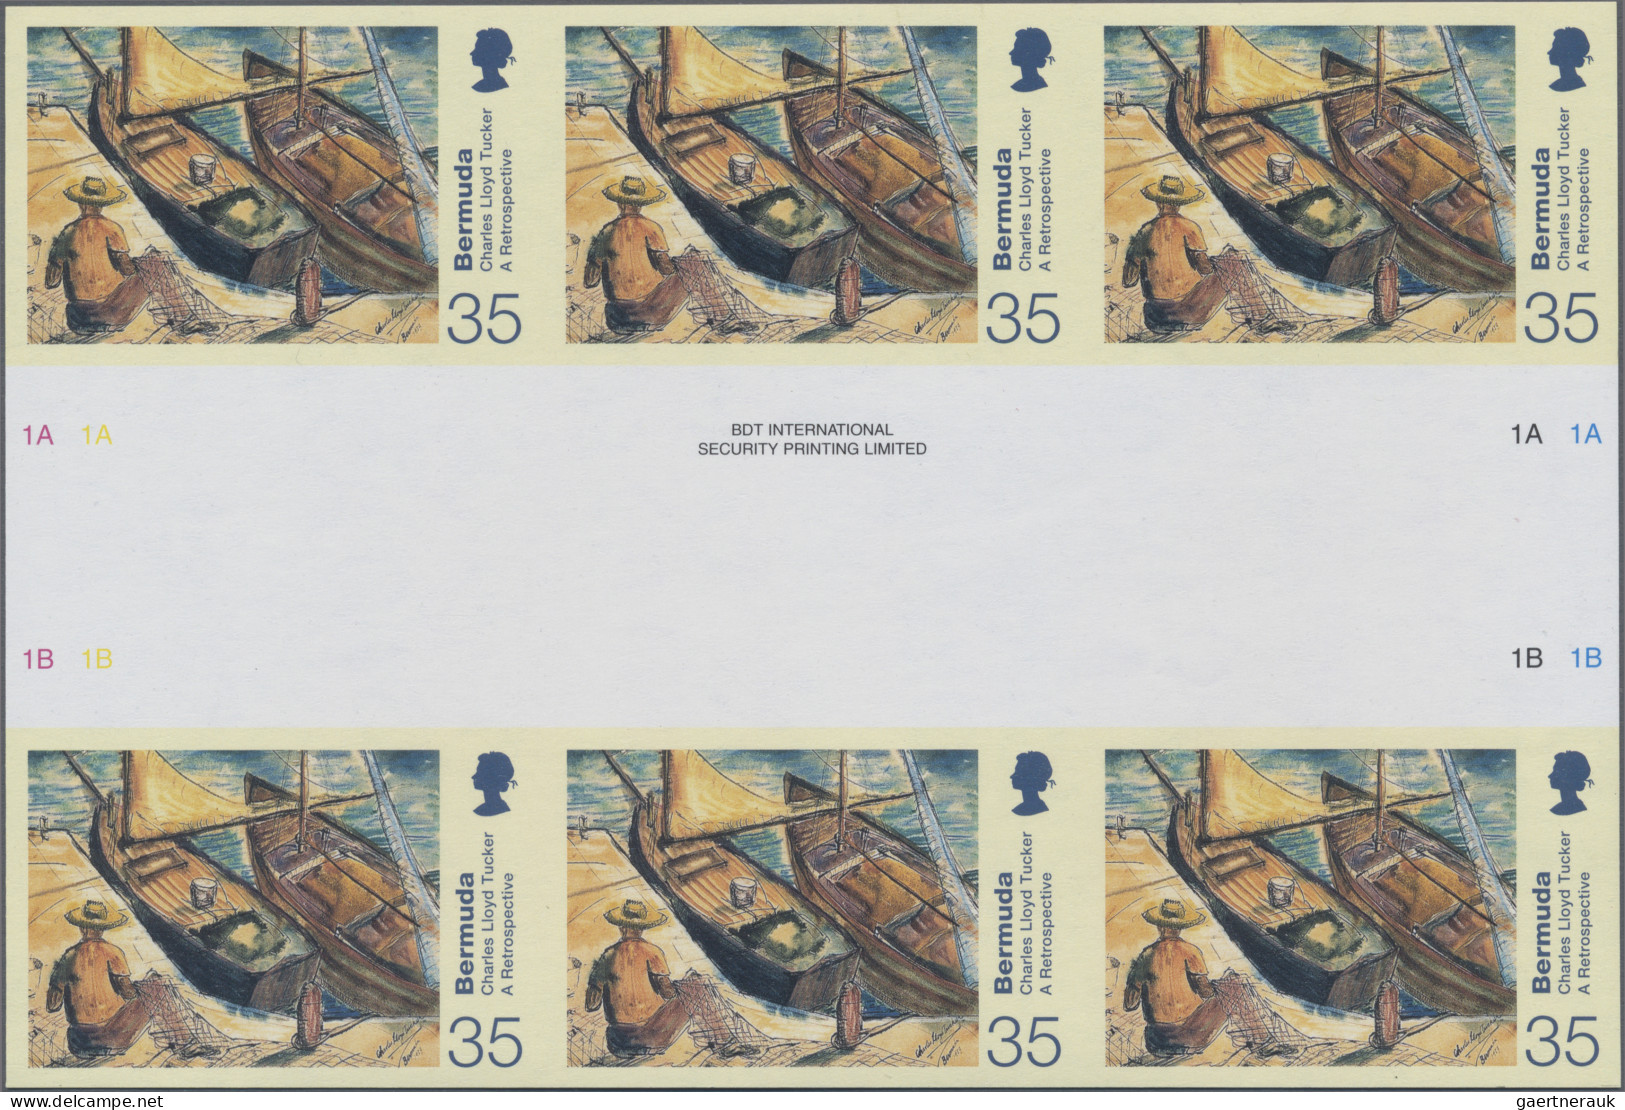 Bermuda: 2001/2015. Collection containing 2485 IMPERFORATE stamps (inclusive man